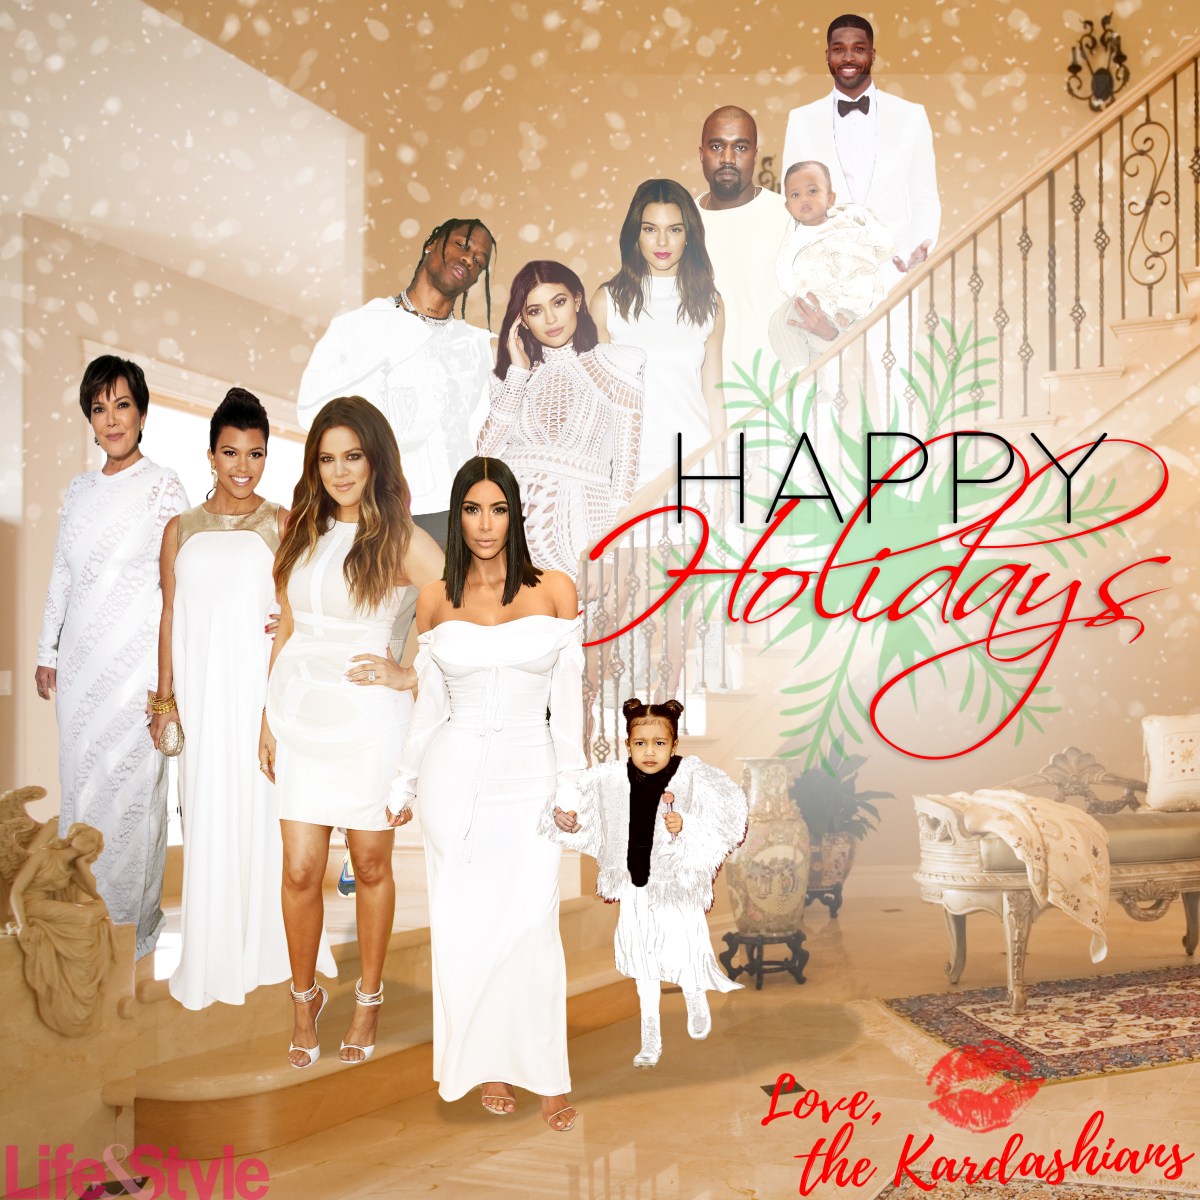 Kardashians Christmas Cards See Our 2017 Predictions